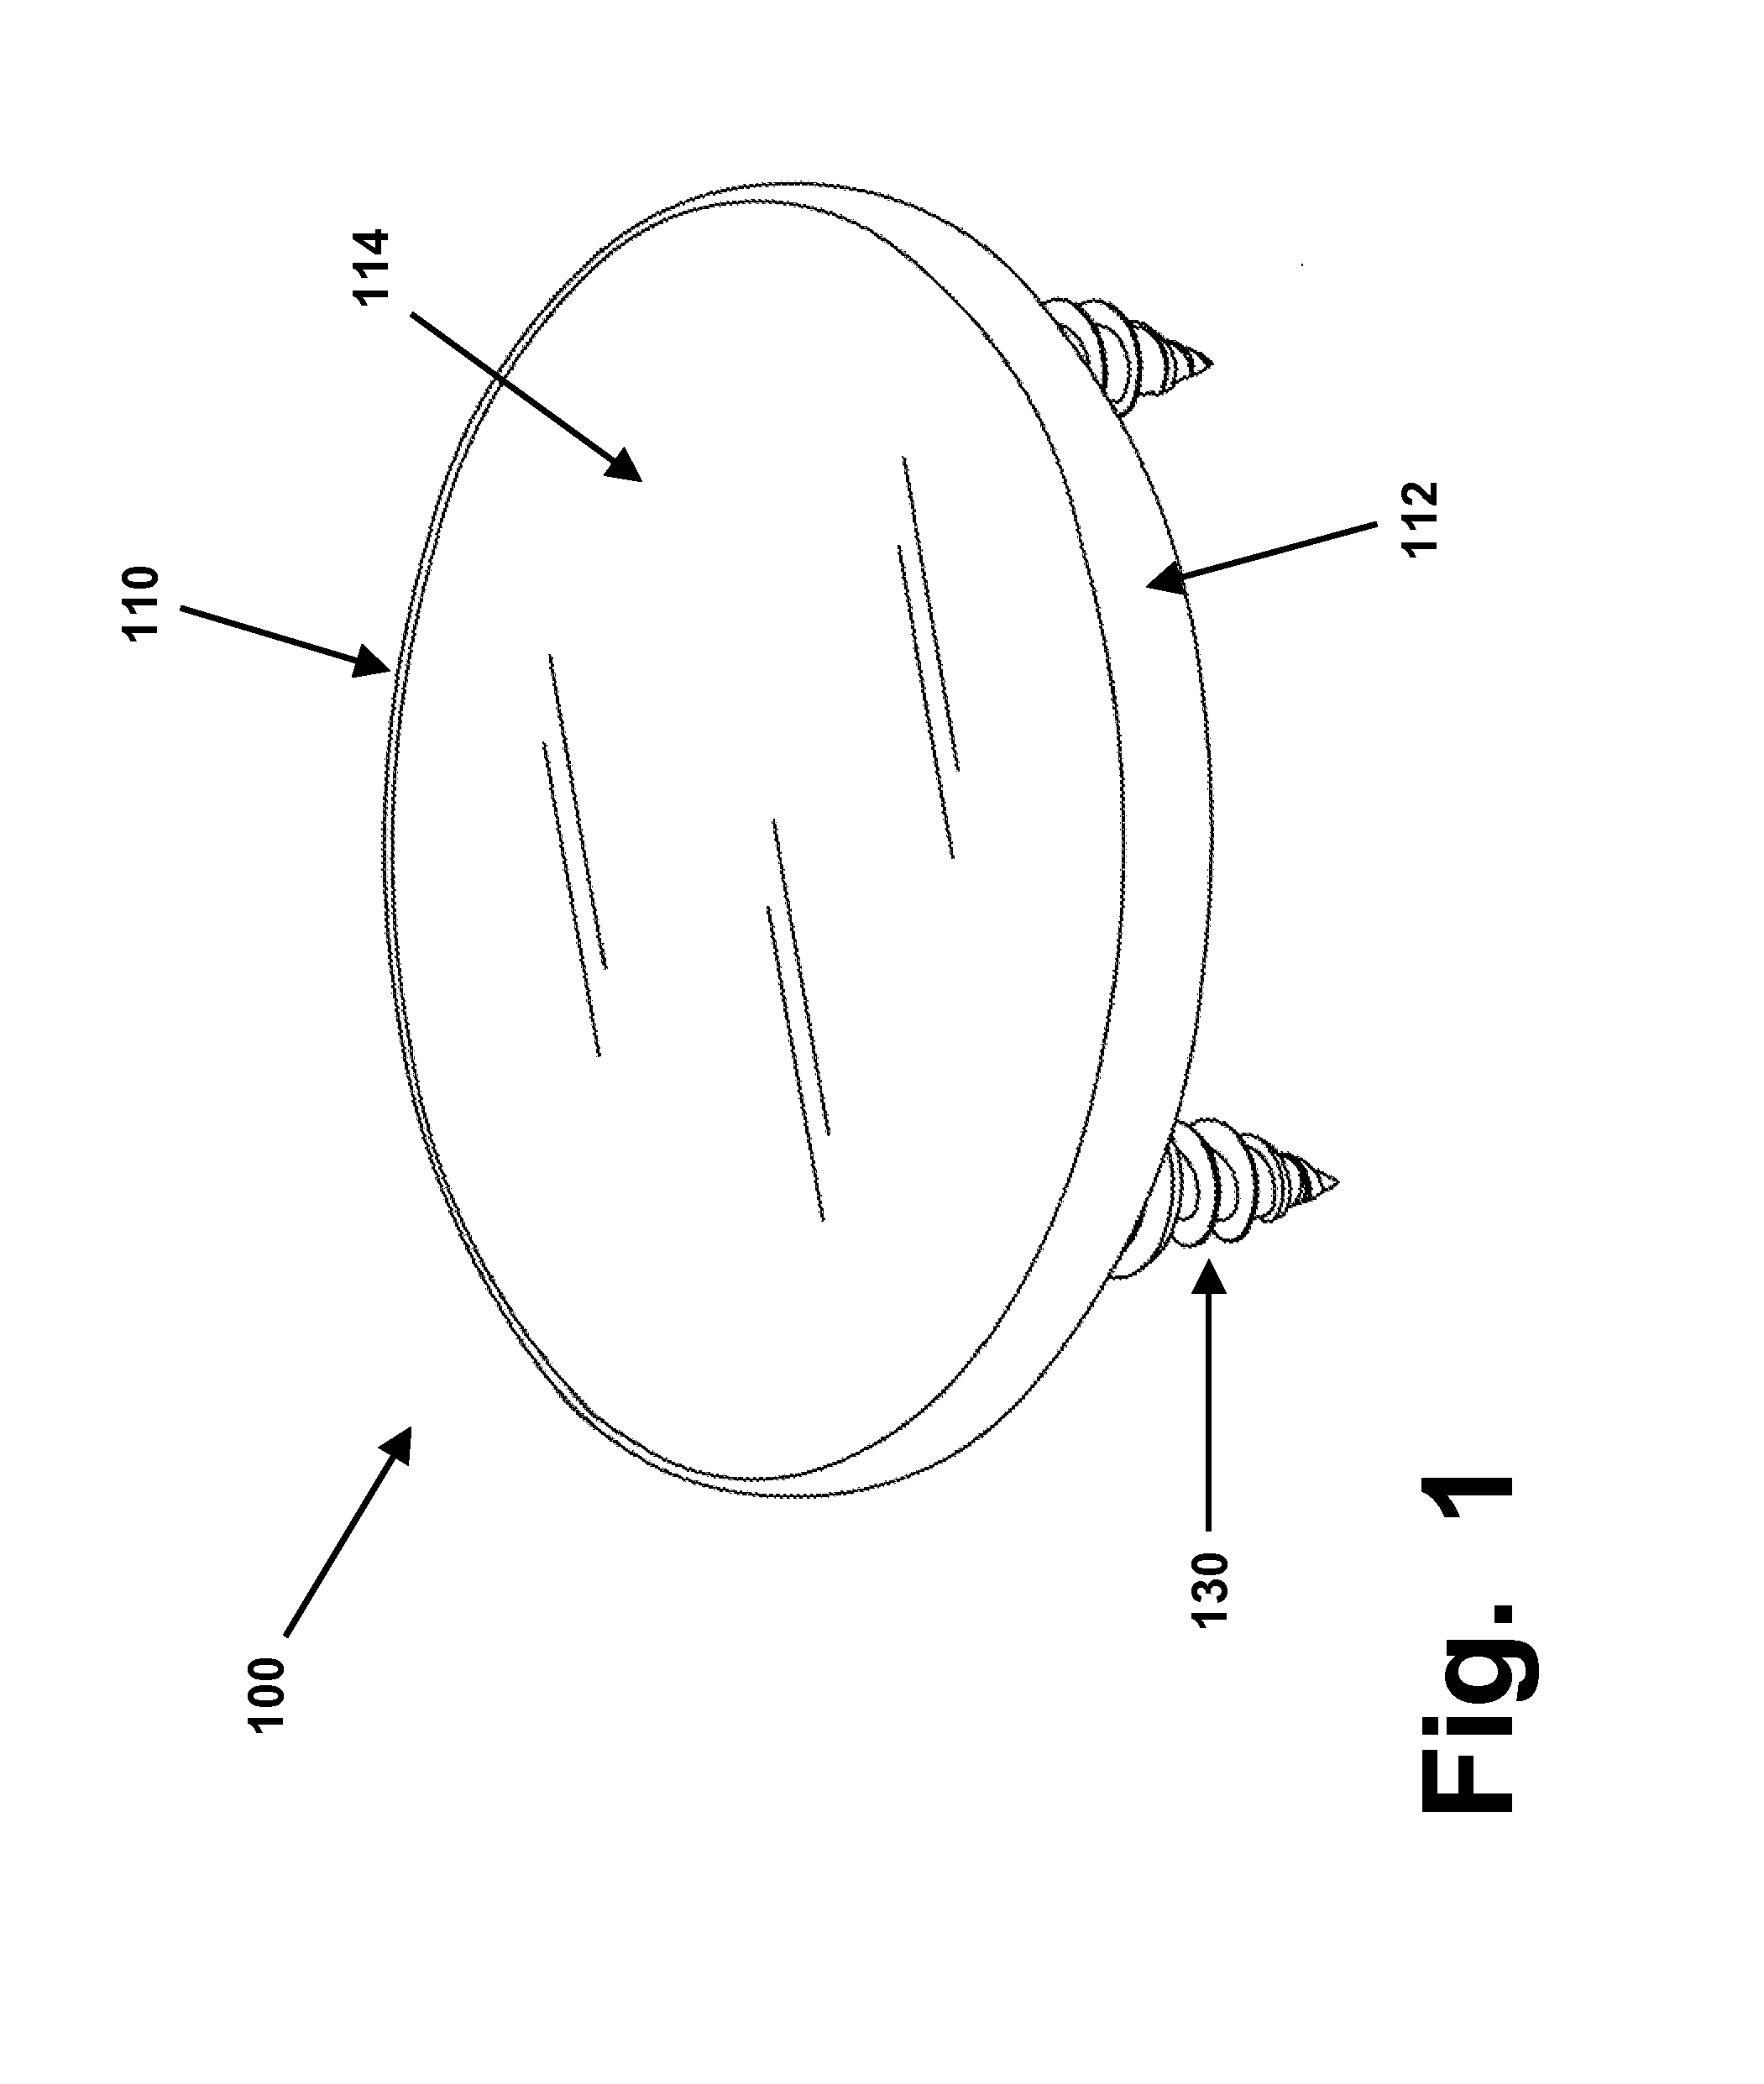 Rim Anchoring Systems for Flexible Surgical Implants for Replacing Cartilage